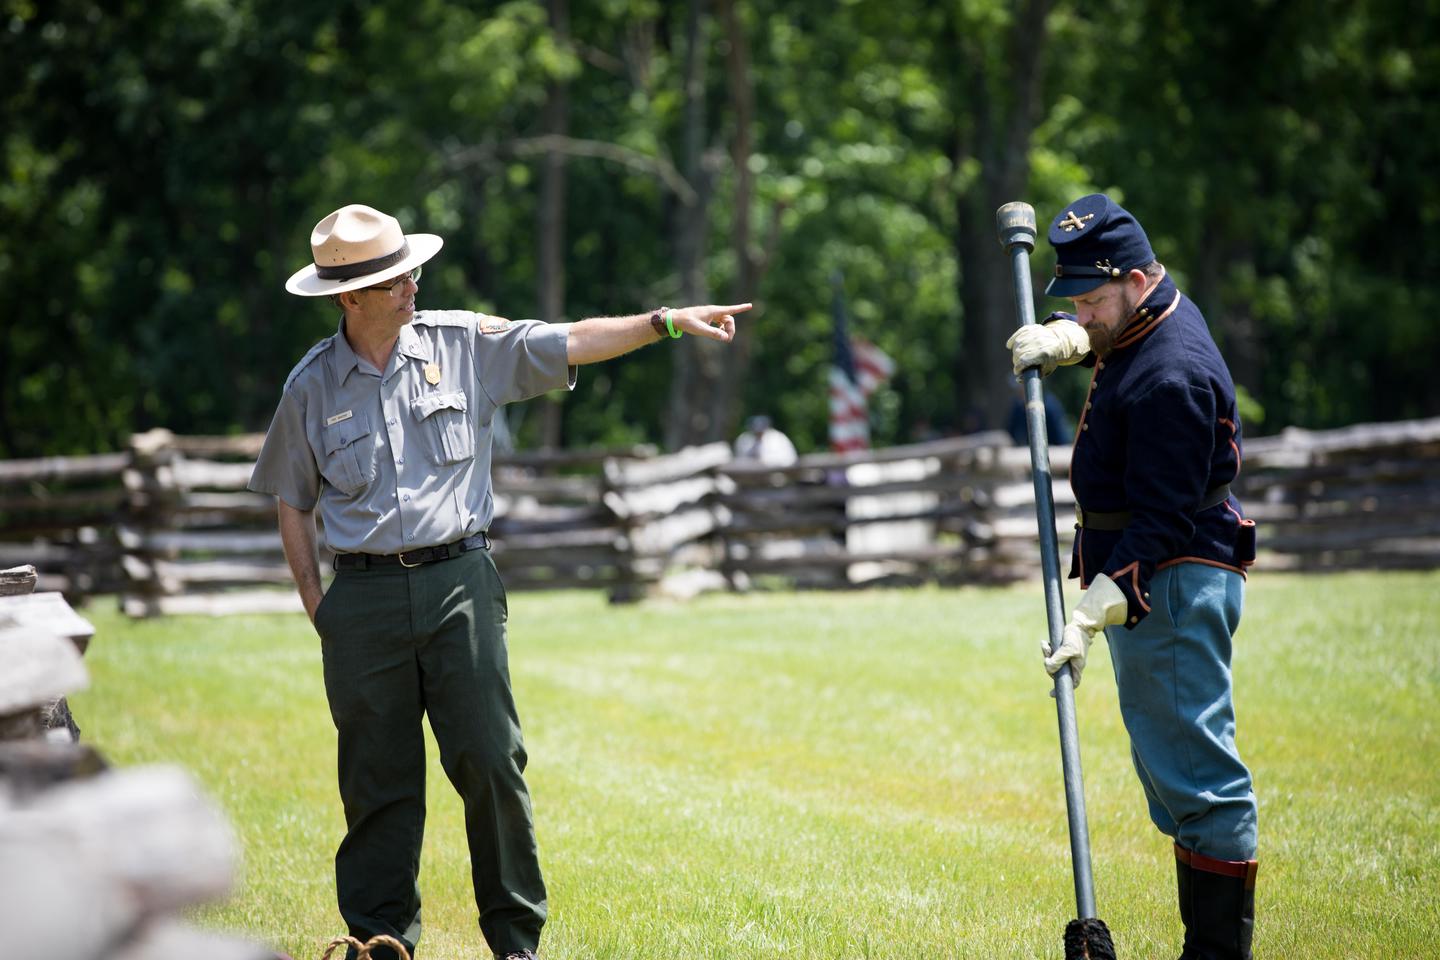 Park Ranger and Cannon CrewRanger Troy Banzhaf giving information about 6 lb. cannon and cannon crew.